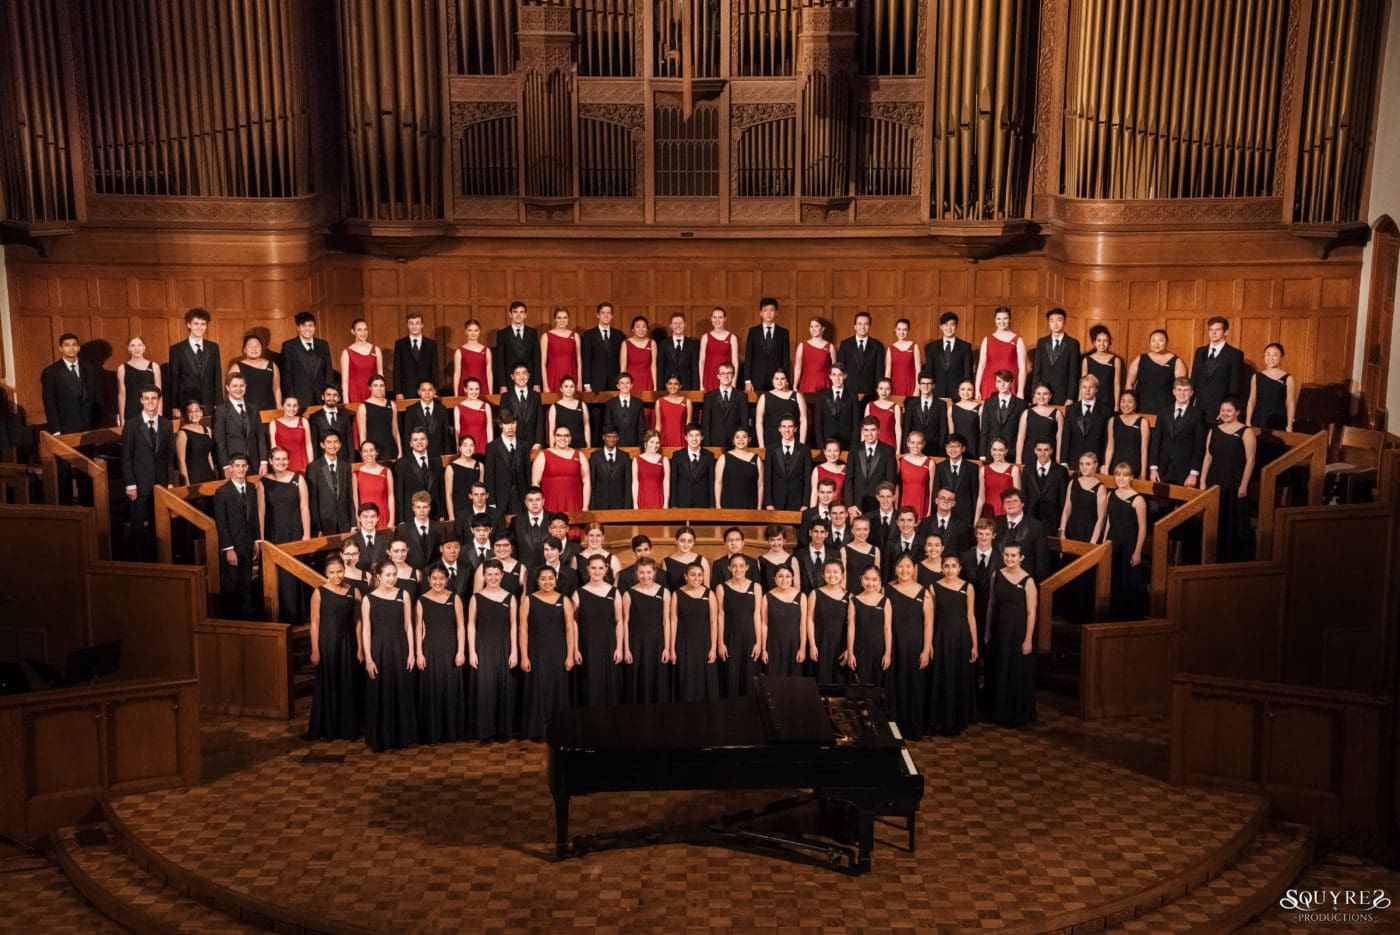 LCHS Choral Artists sing in France: Concert Repertoire